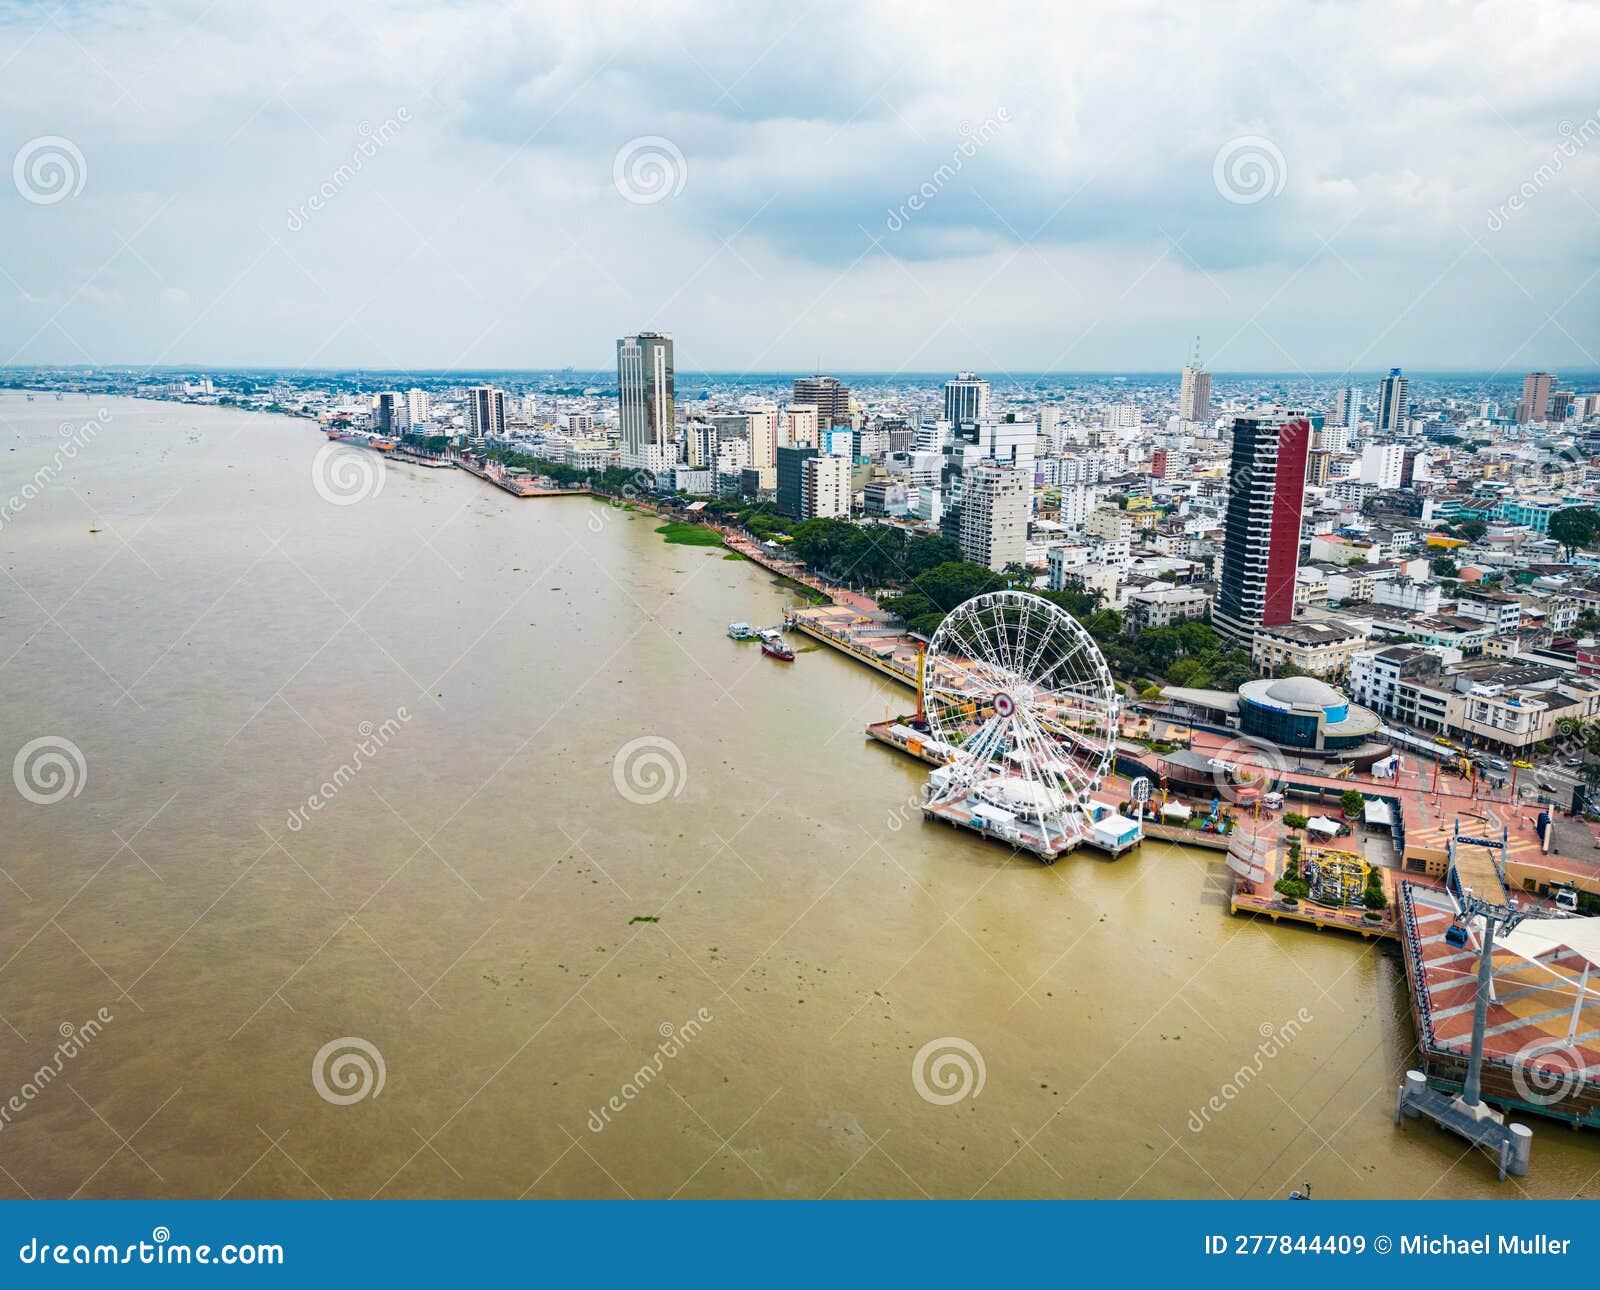 aerial view of malecon simon bolivar in guayaquil